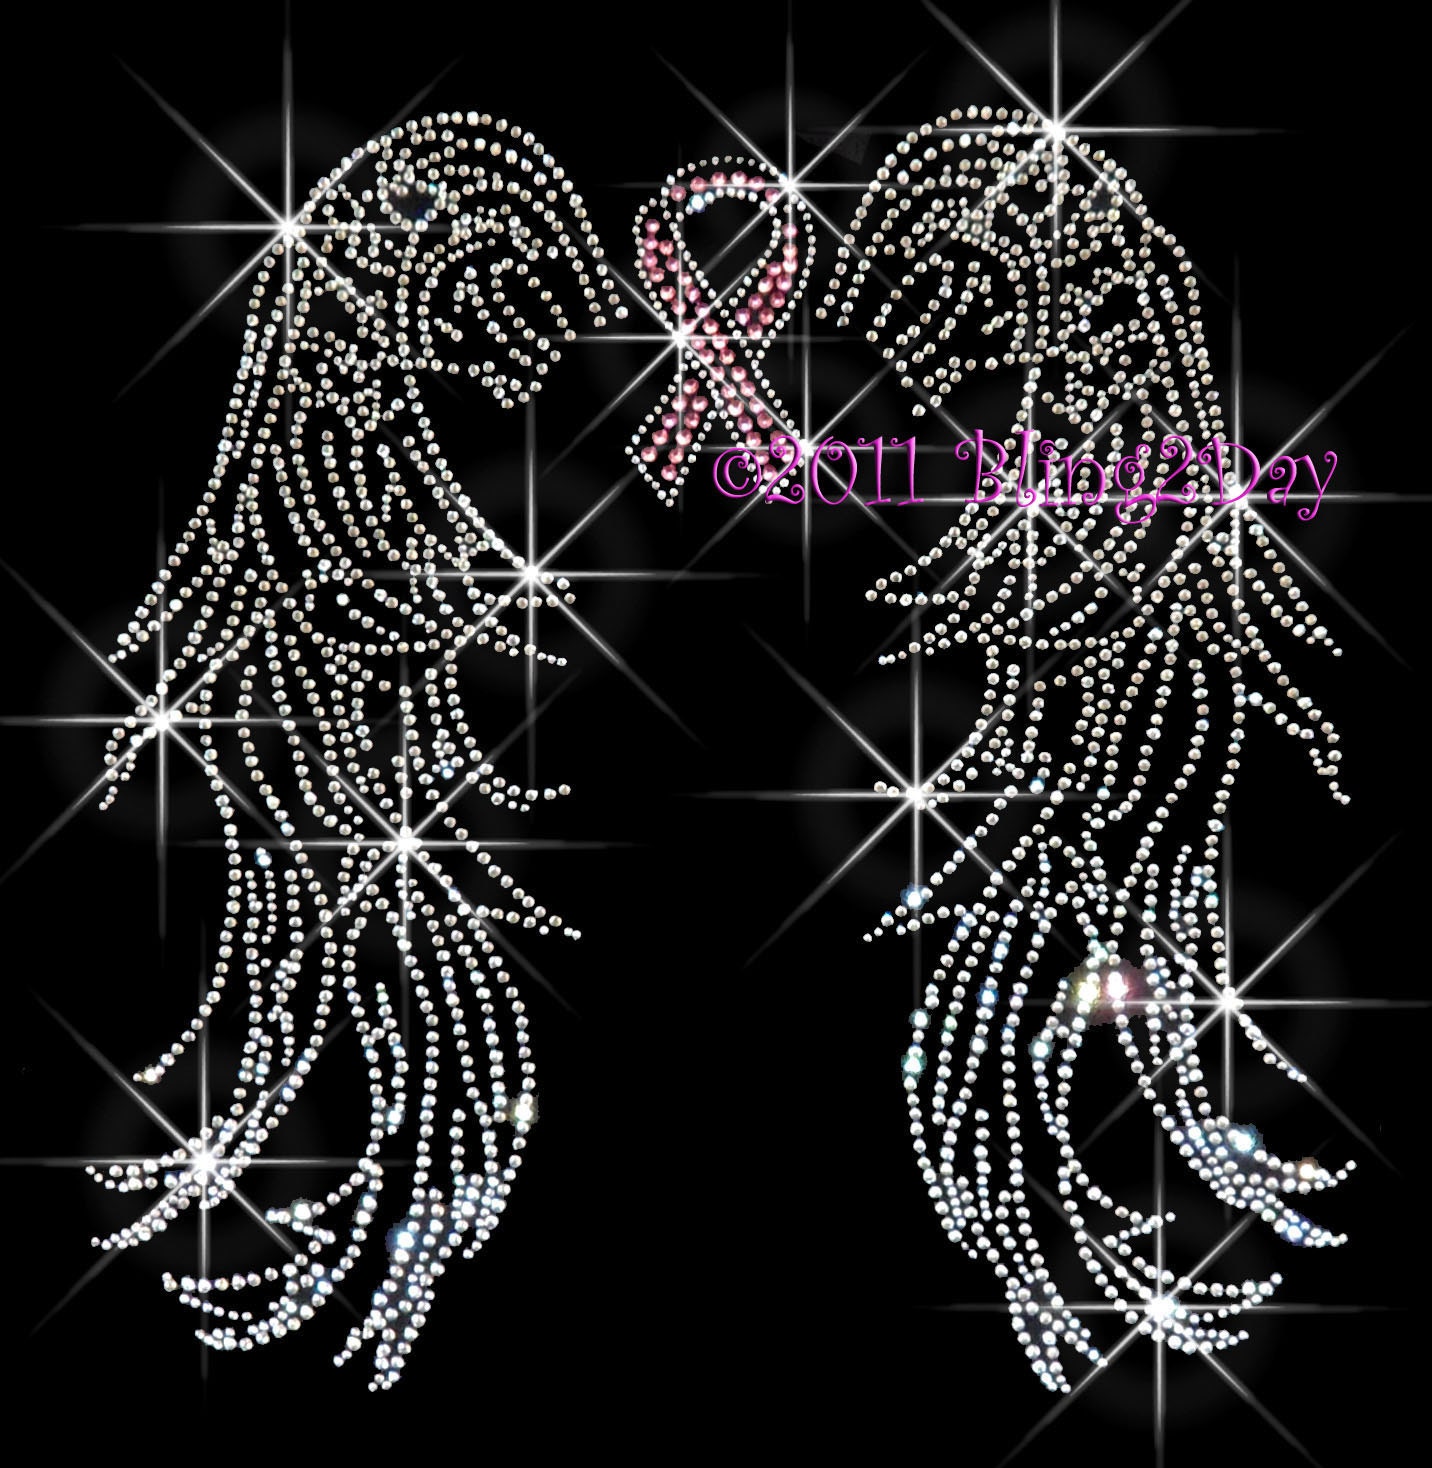 Cancer Ribbon With Wings